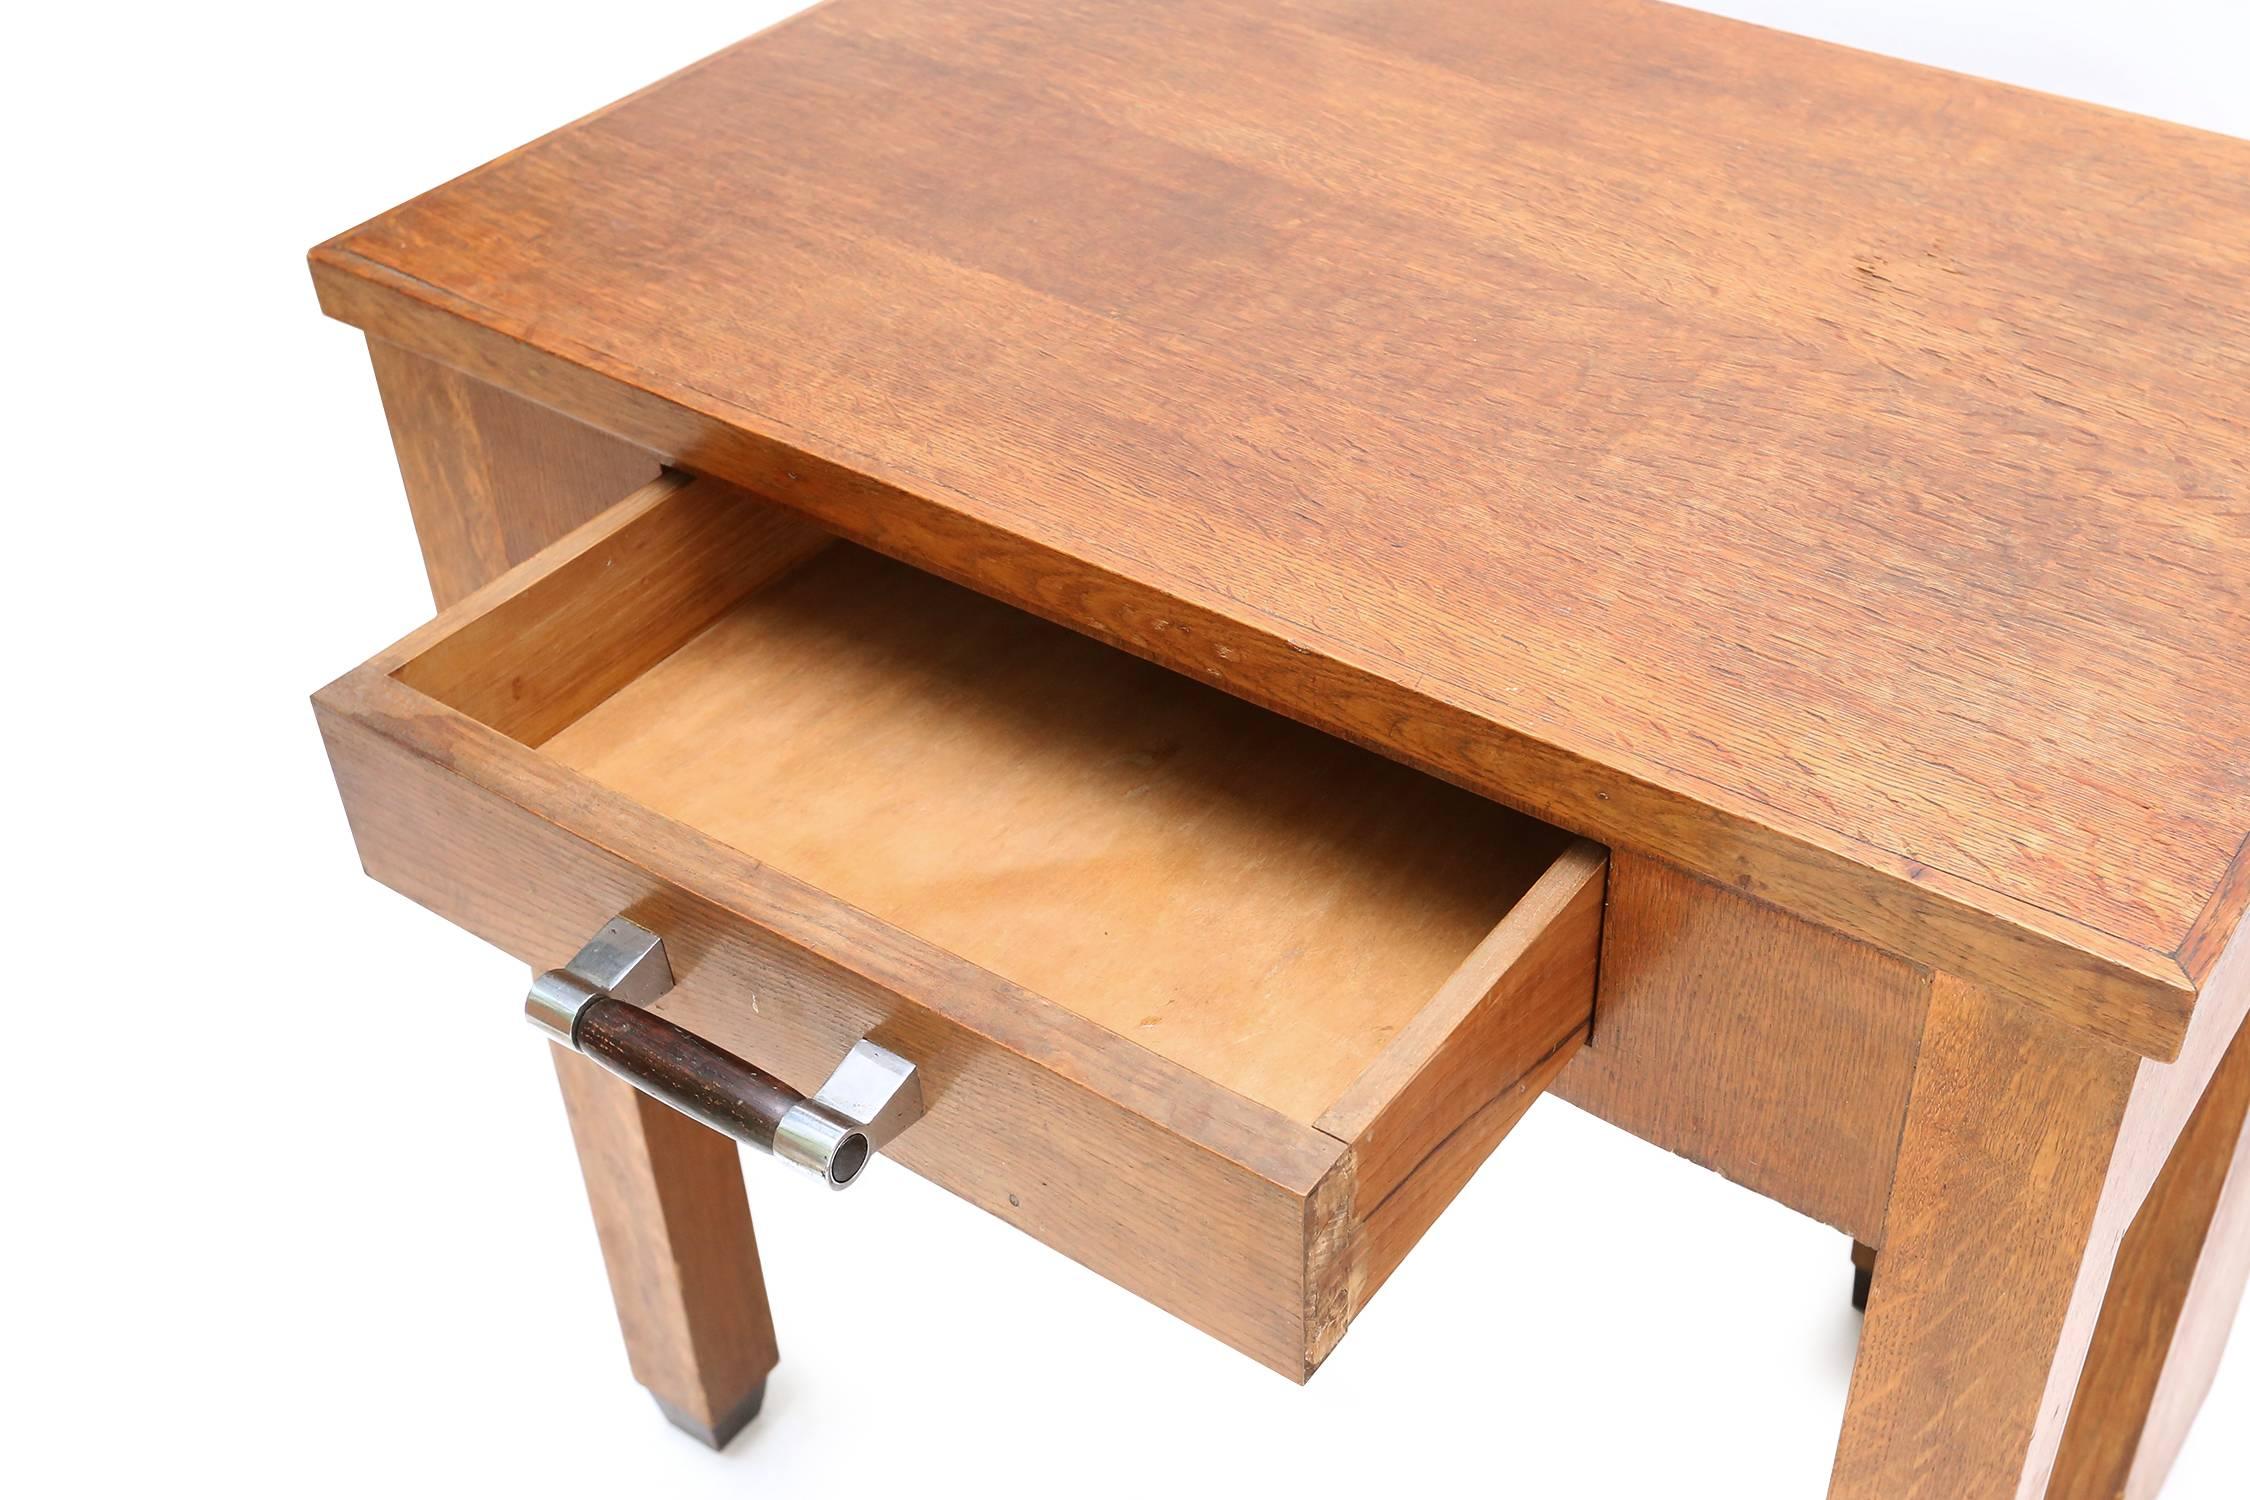 This Minimalist early 20th century (1910) desk comes from the era of the first modern designs with straight lines.